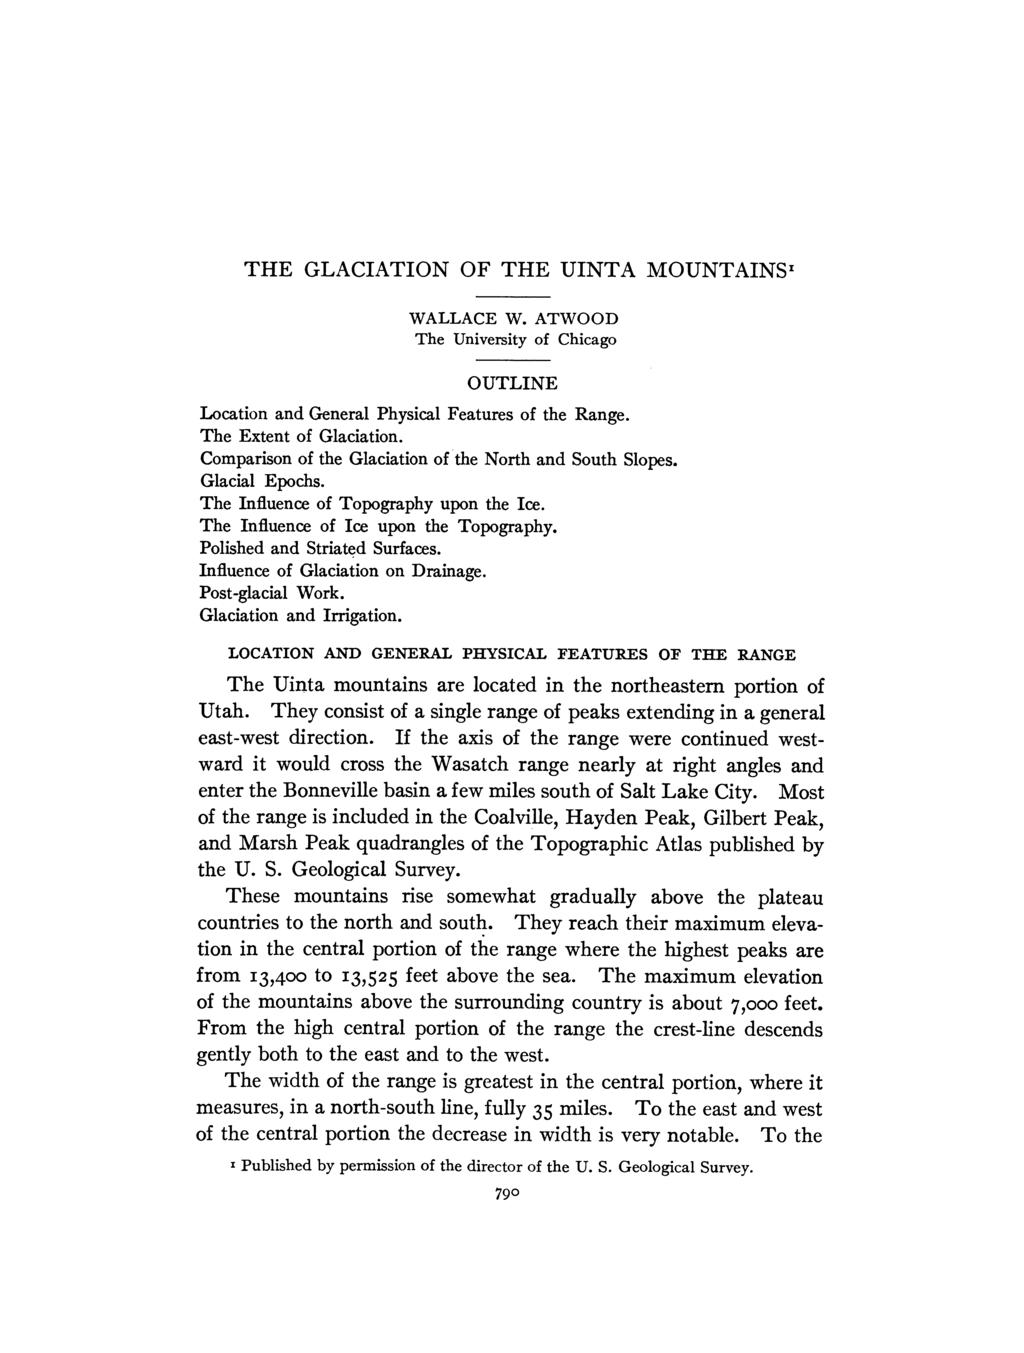 THE GLACIATION OF THE UINTA MOUNTAINS' WALLACE W. ATWOOD The University of Chicago OUTLINE Location and General Physical Features of the Range. The Extent of Glaciation.